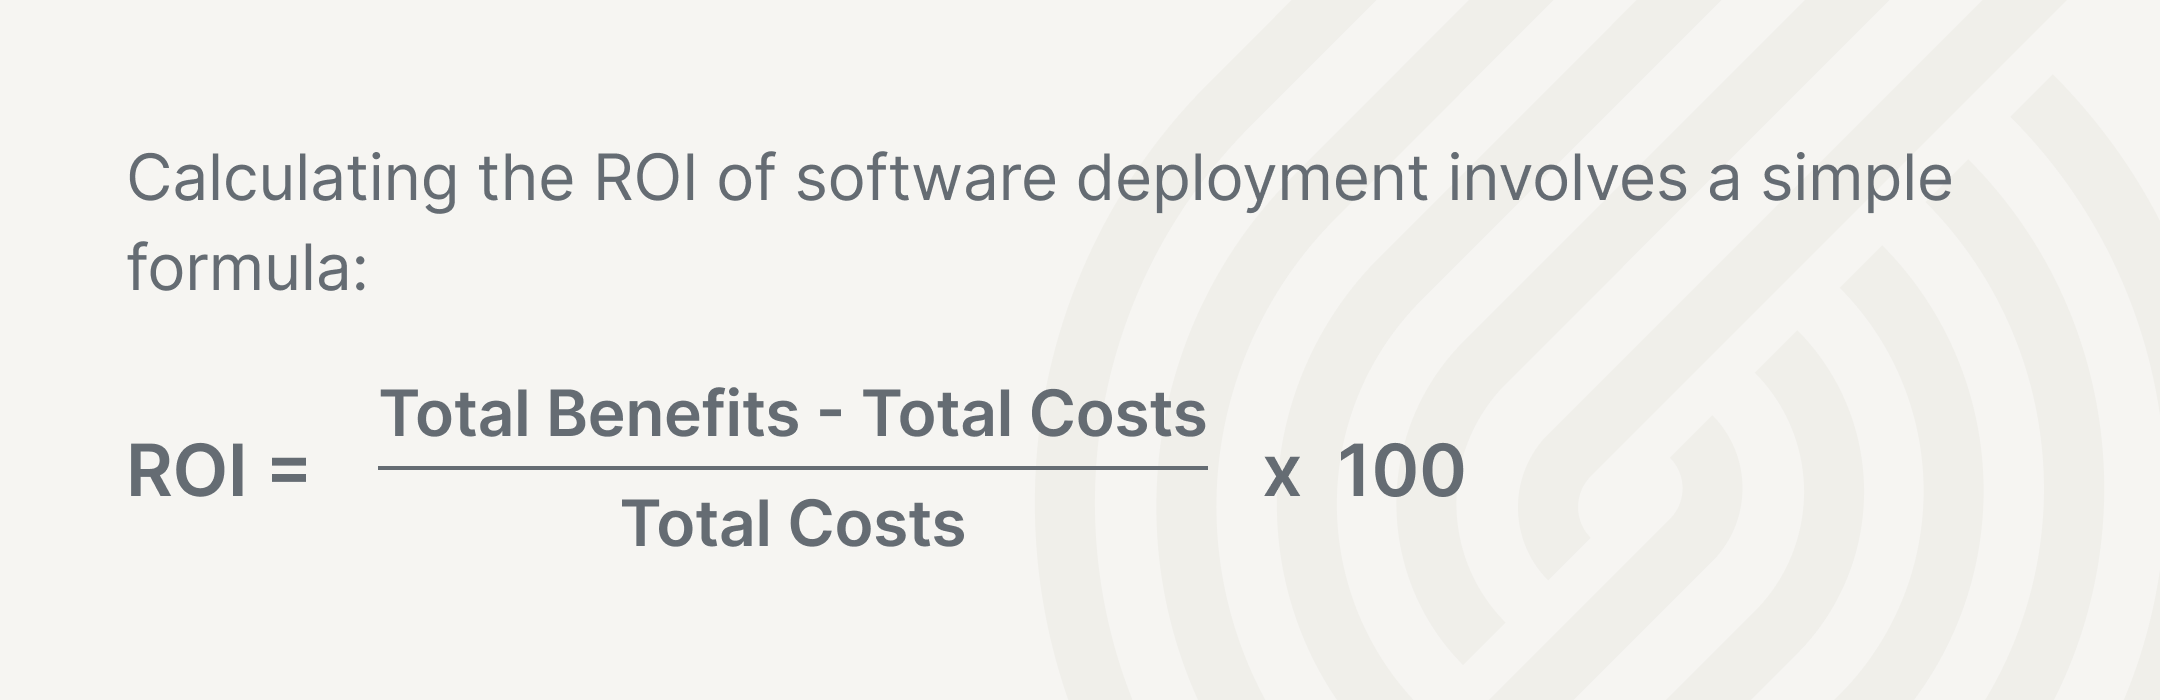 ROI of software deployment